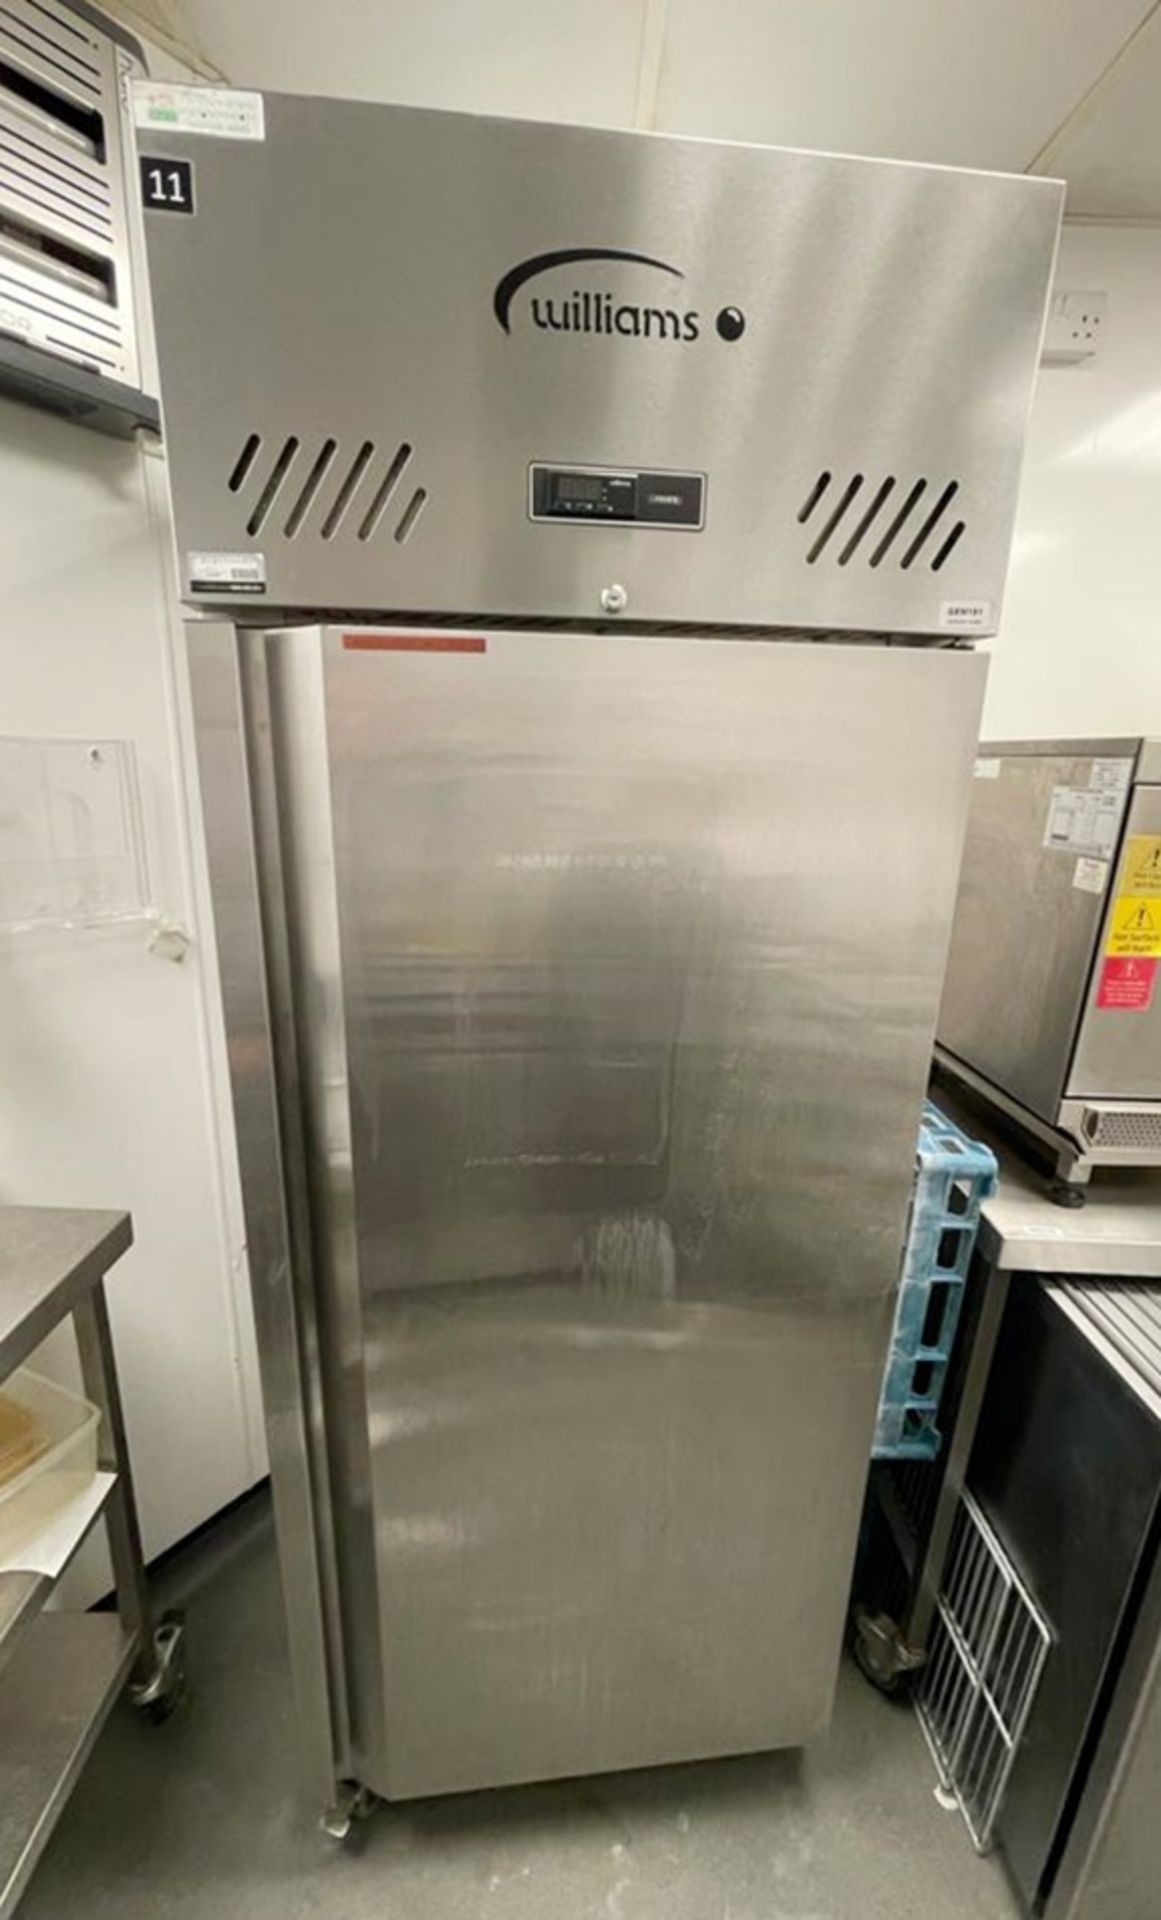 1 x Williams HJ1SA Commercial Upright Refrigerator With Stainless Steel Exterior - CL670 - Ref: - Image 5 of 6